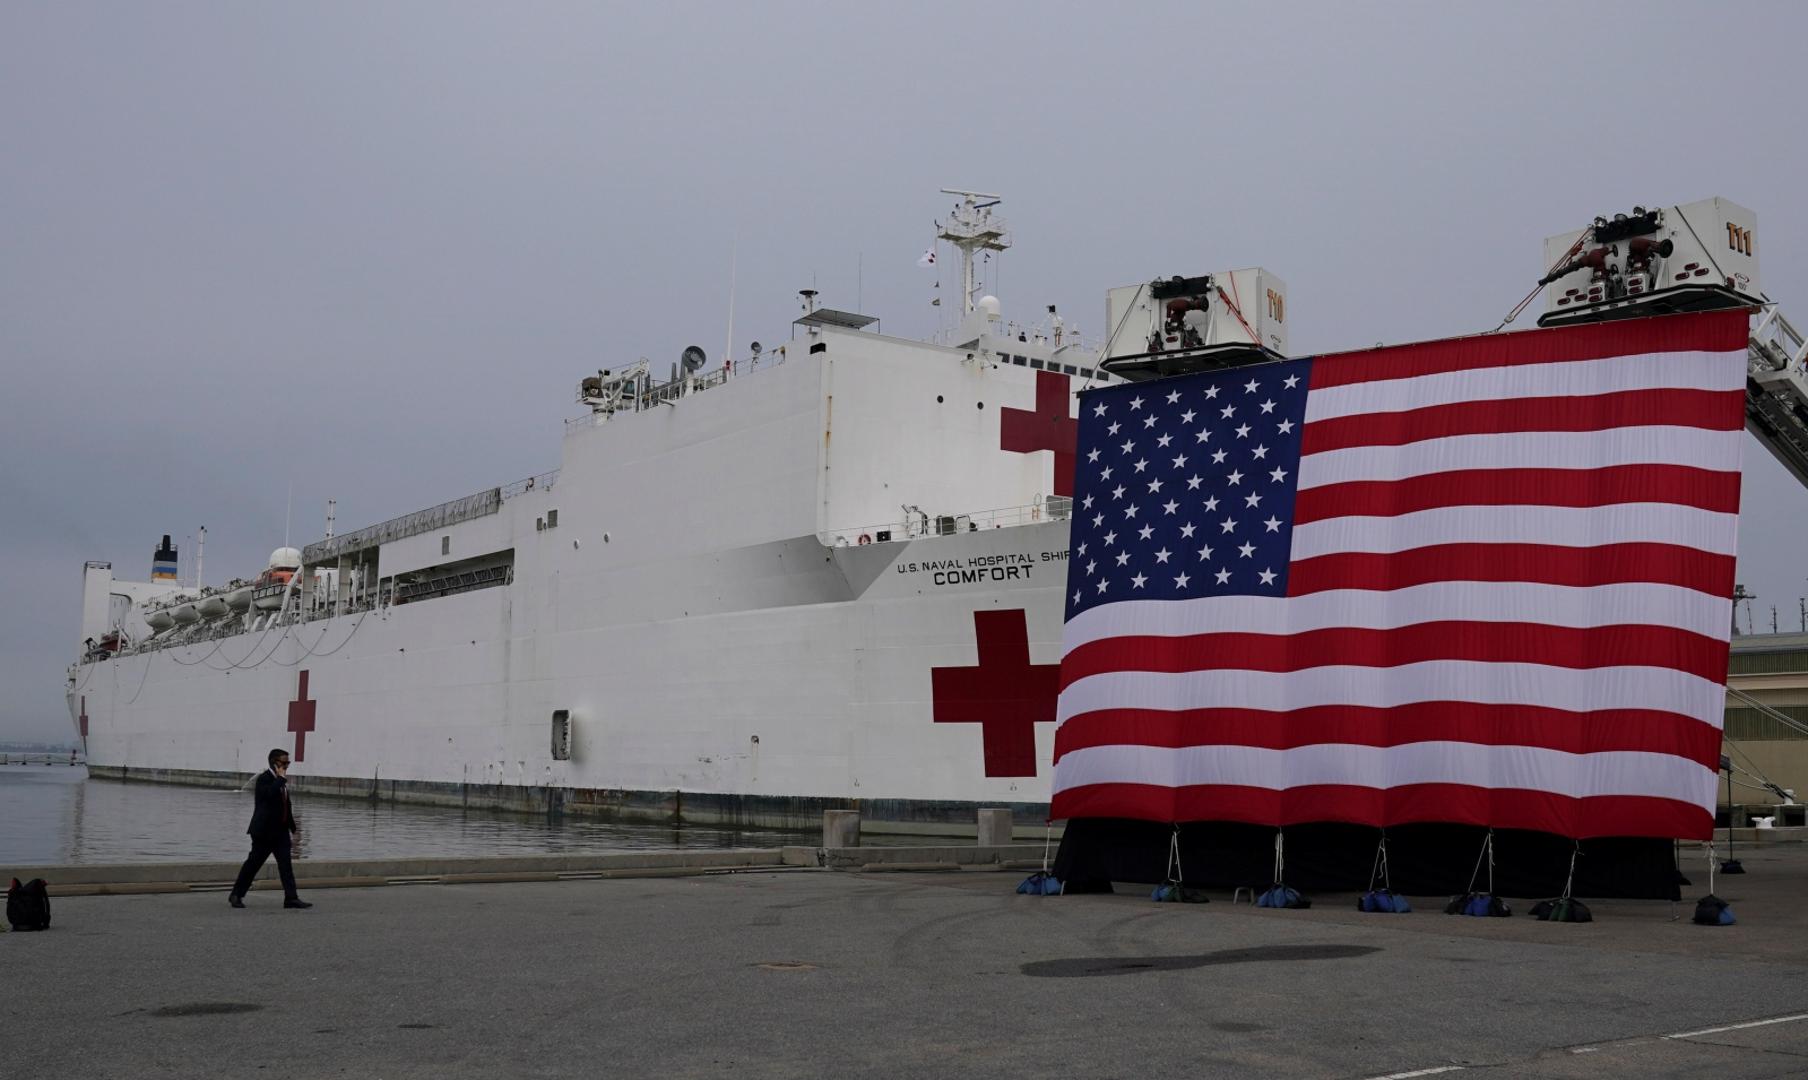 Trump visits Naval Station Norfolk, Virginia, for a send off for a hospital ship departing for New York to aid in coronavirus treatment The hospital ship USNS Comfort, which will depart for New York to help with the coronavirus disease (COVID-19) crisis, sits behind a big flag prior to the arrival of U.S. President Donald Trump to give the ship a send-off at Naval Station Norfolk, in Norfolk, Virginia, U.S., March 28, 2020. REUTERS/Kevin Lamarque KEVIN LAMARQUE